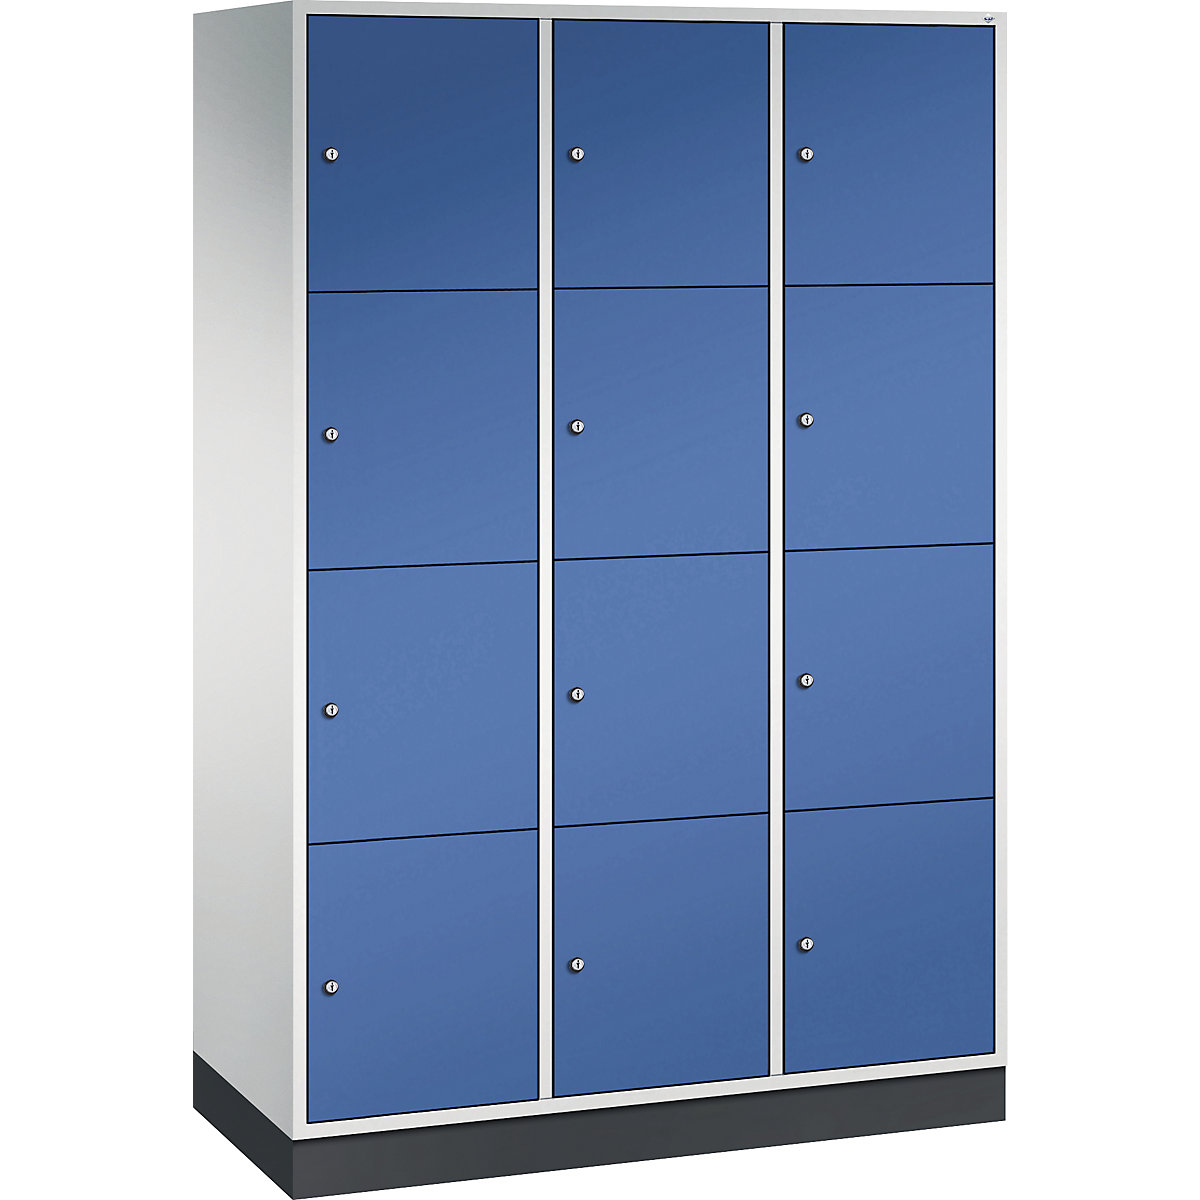 INTRO steel compartment locker, compartment height 435 mm – C+P, WxD 1220 x 500 mm, 12 compartments, light grey body, gentian blue doors